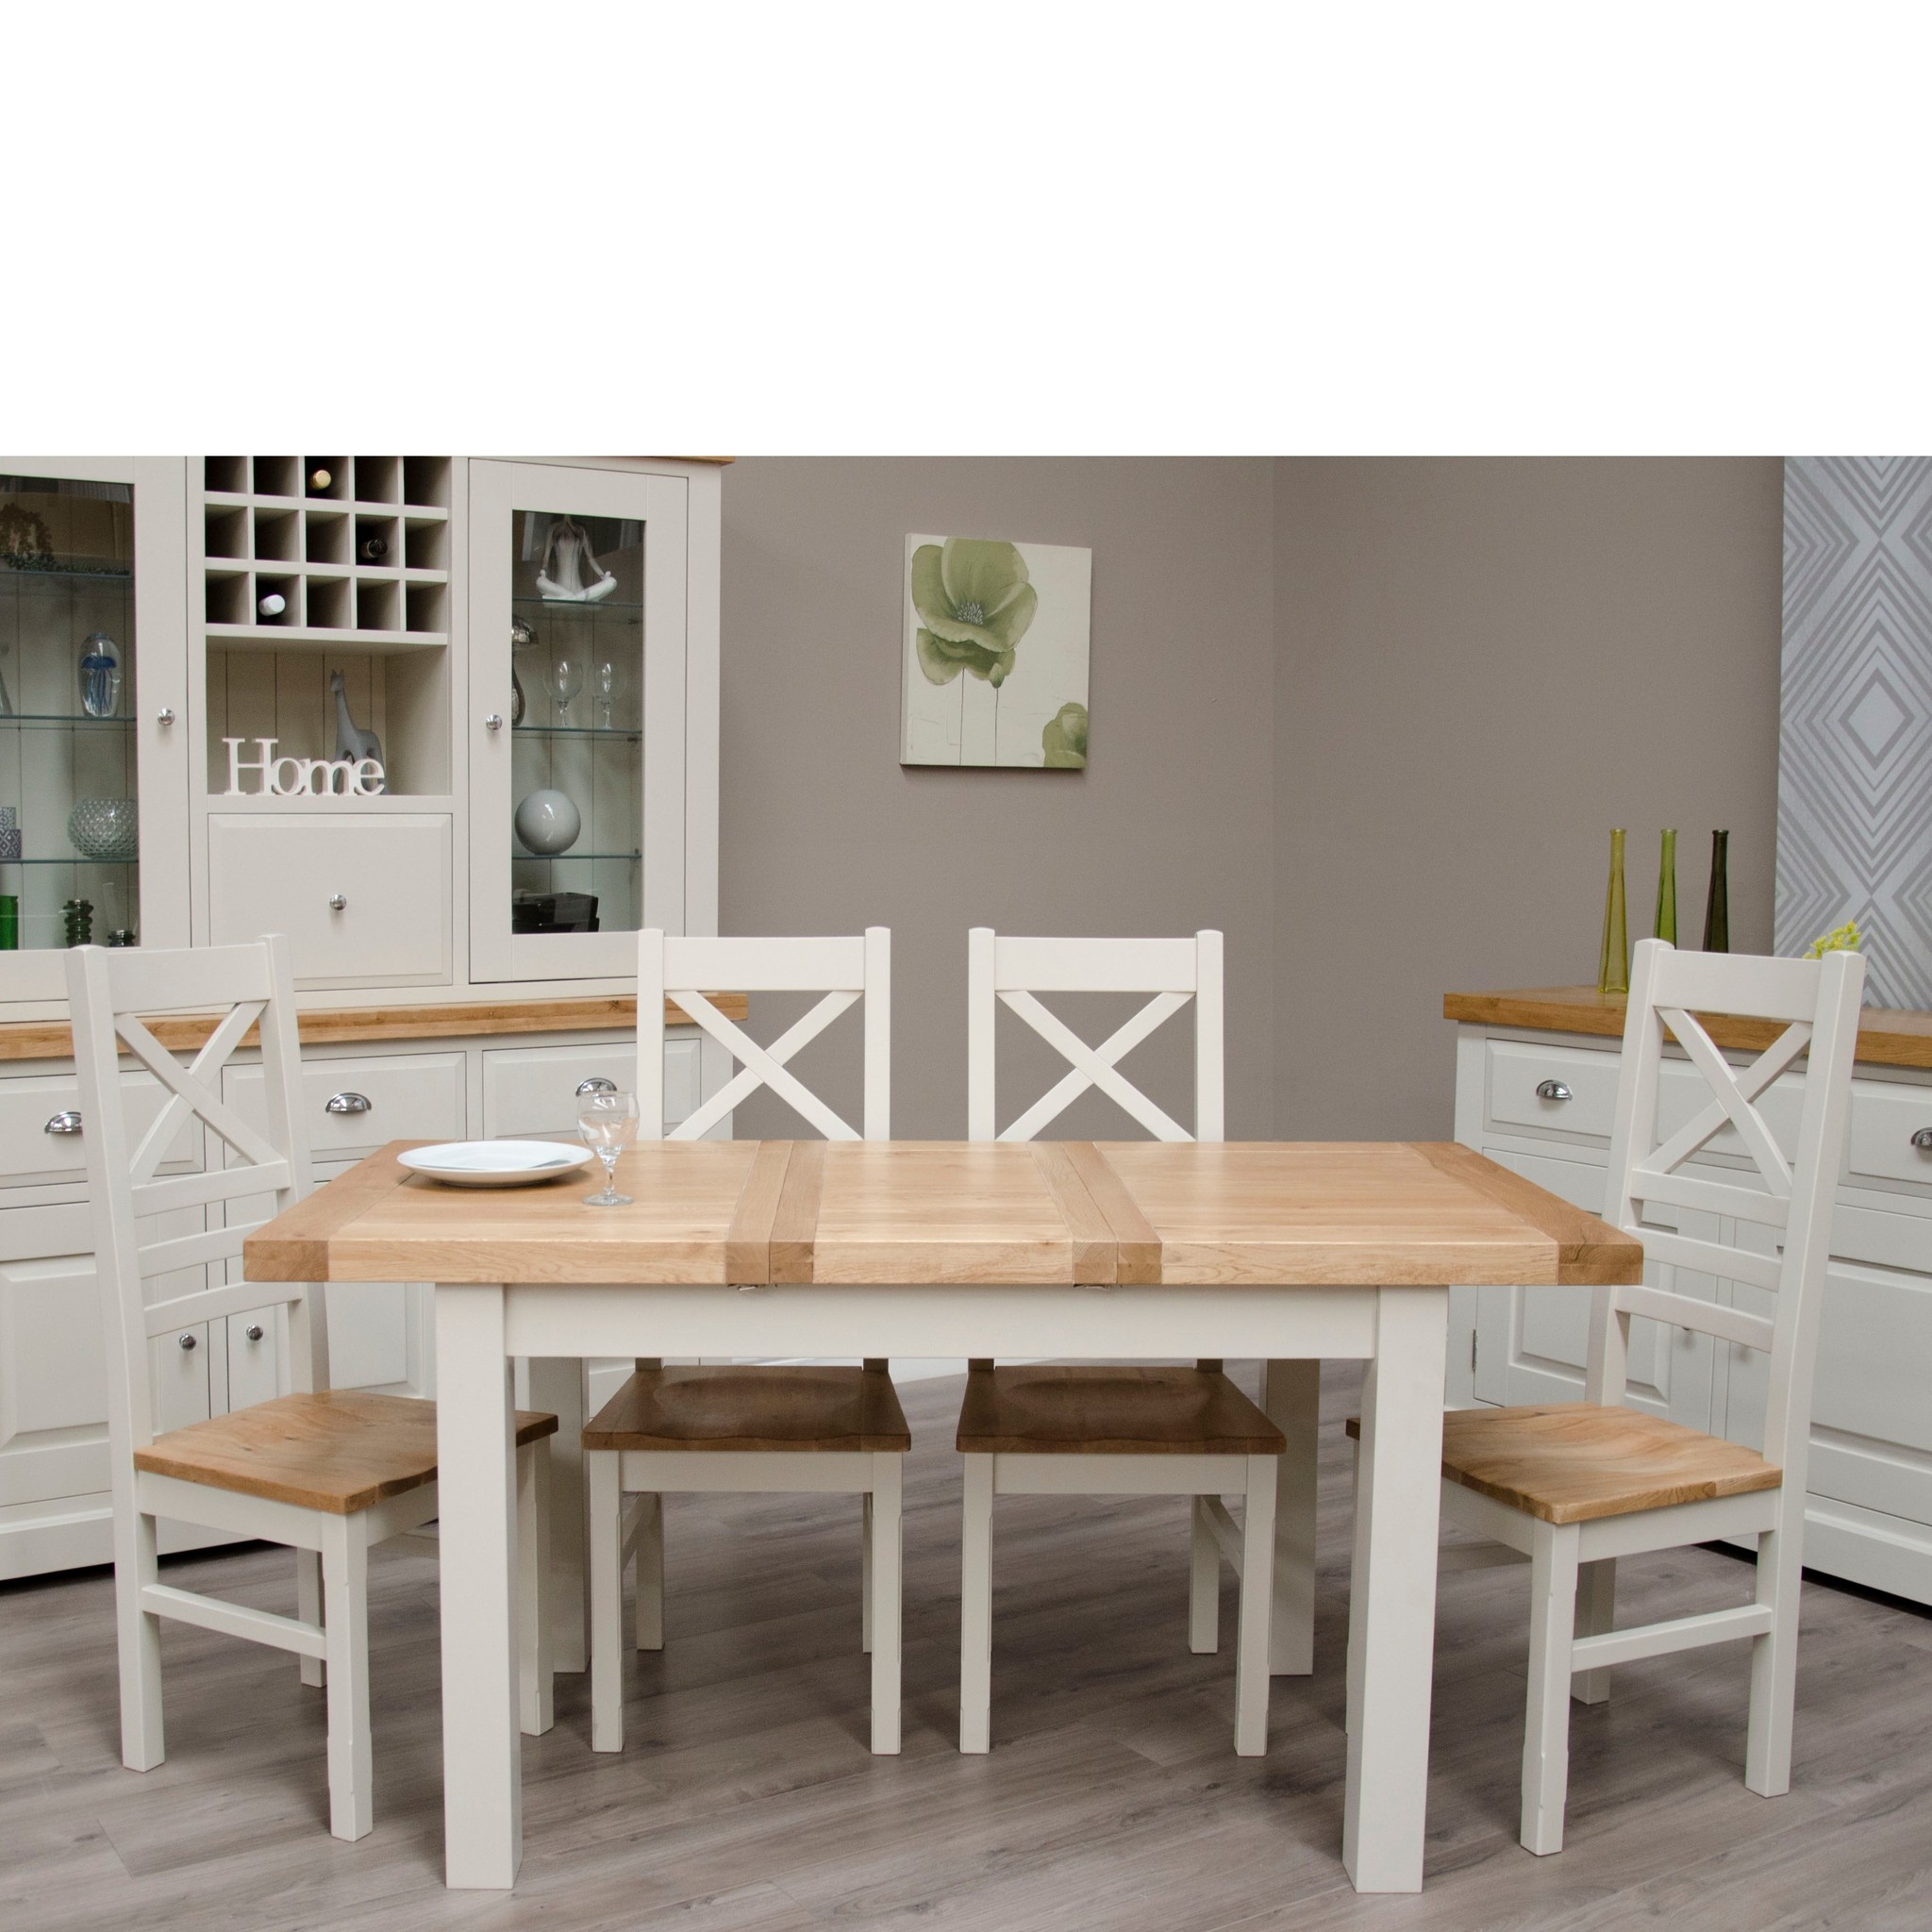 HomestyleGB Painted Deluxe Small Extending Dining Table